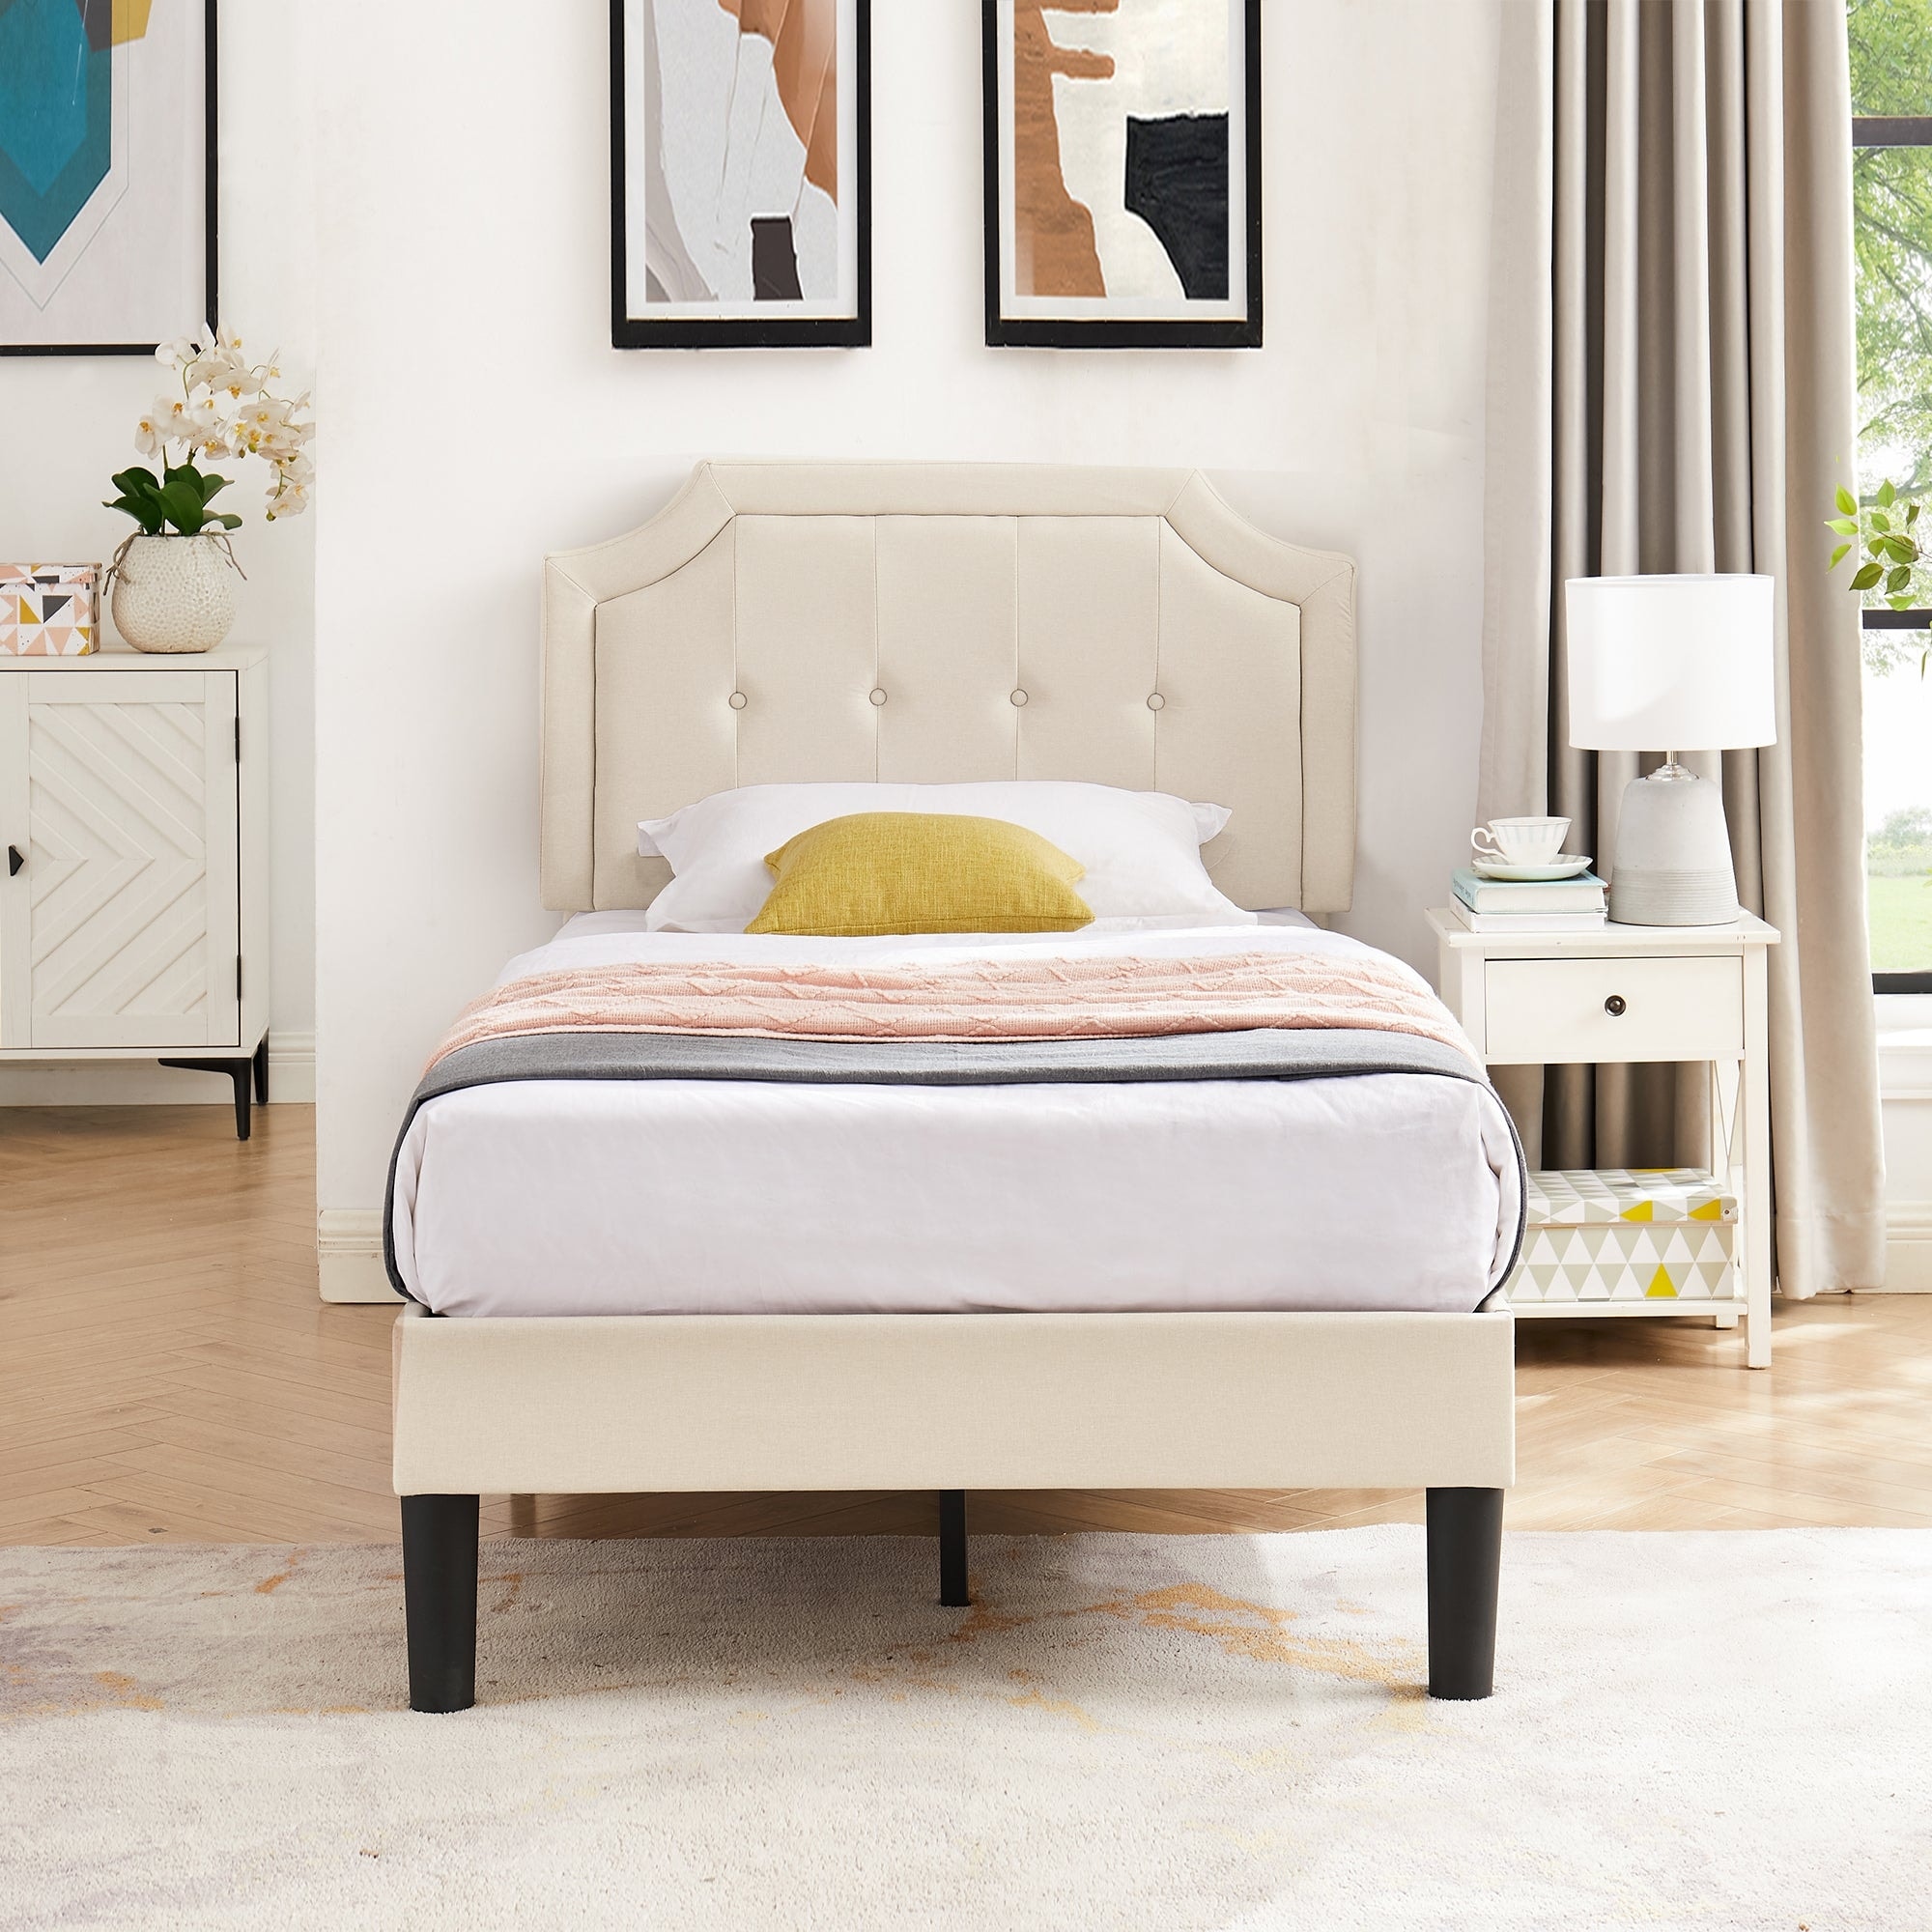 https://ak1.ostkcdn.com/images/products/is/images/direct/0d9bf32e332fc5482d47b15965e53fcbaea10607/VECELO-Upholstered-Platform-Bed-with-Adjustable-Headboard%2CBeige-Twin-Full-Queen-Size-Bed.jpg